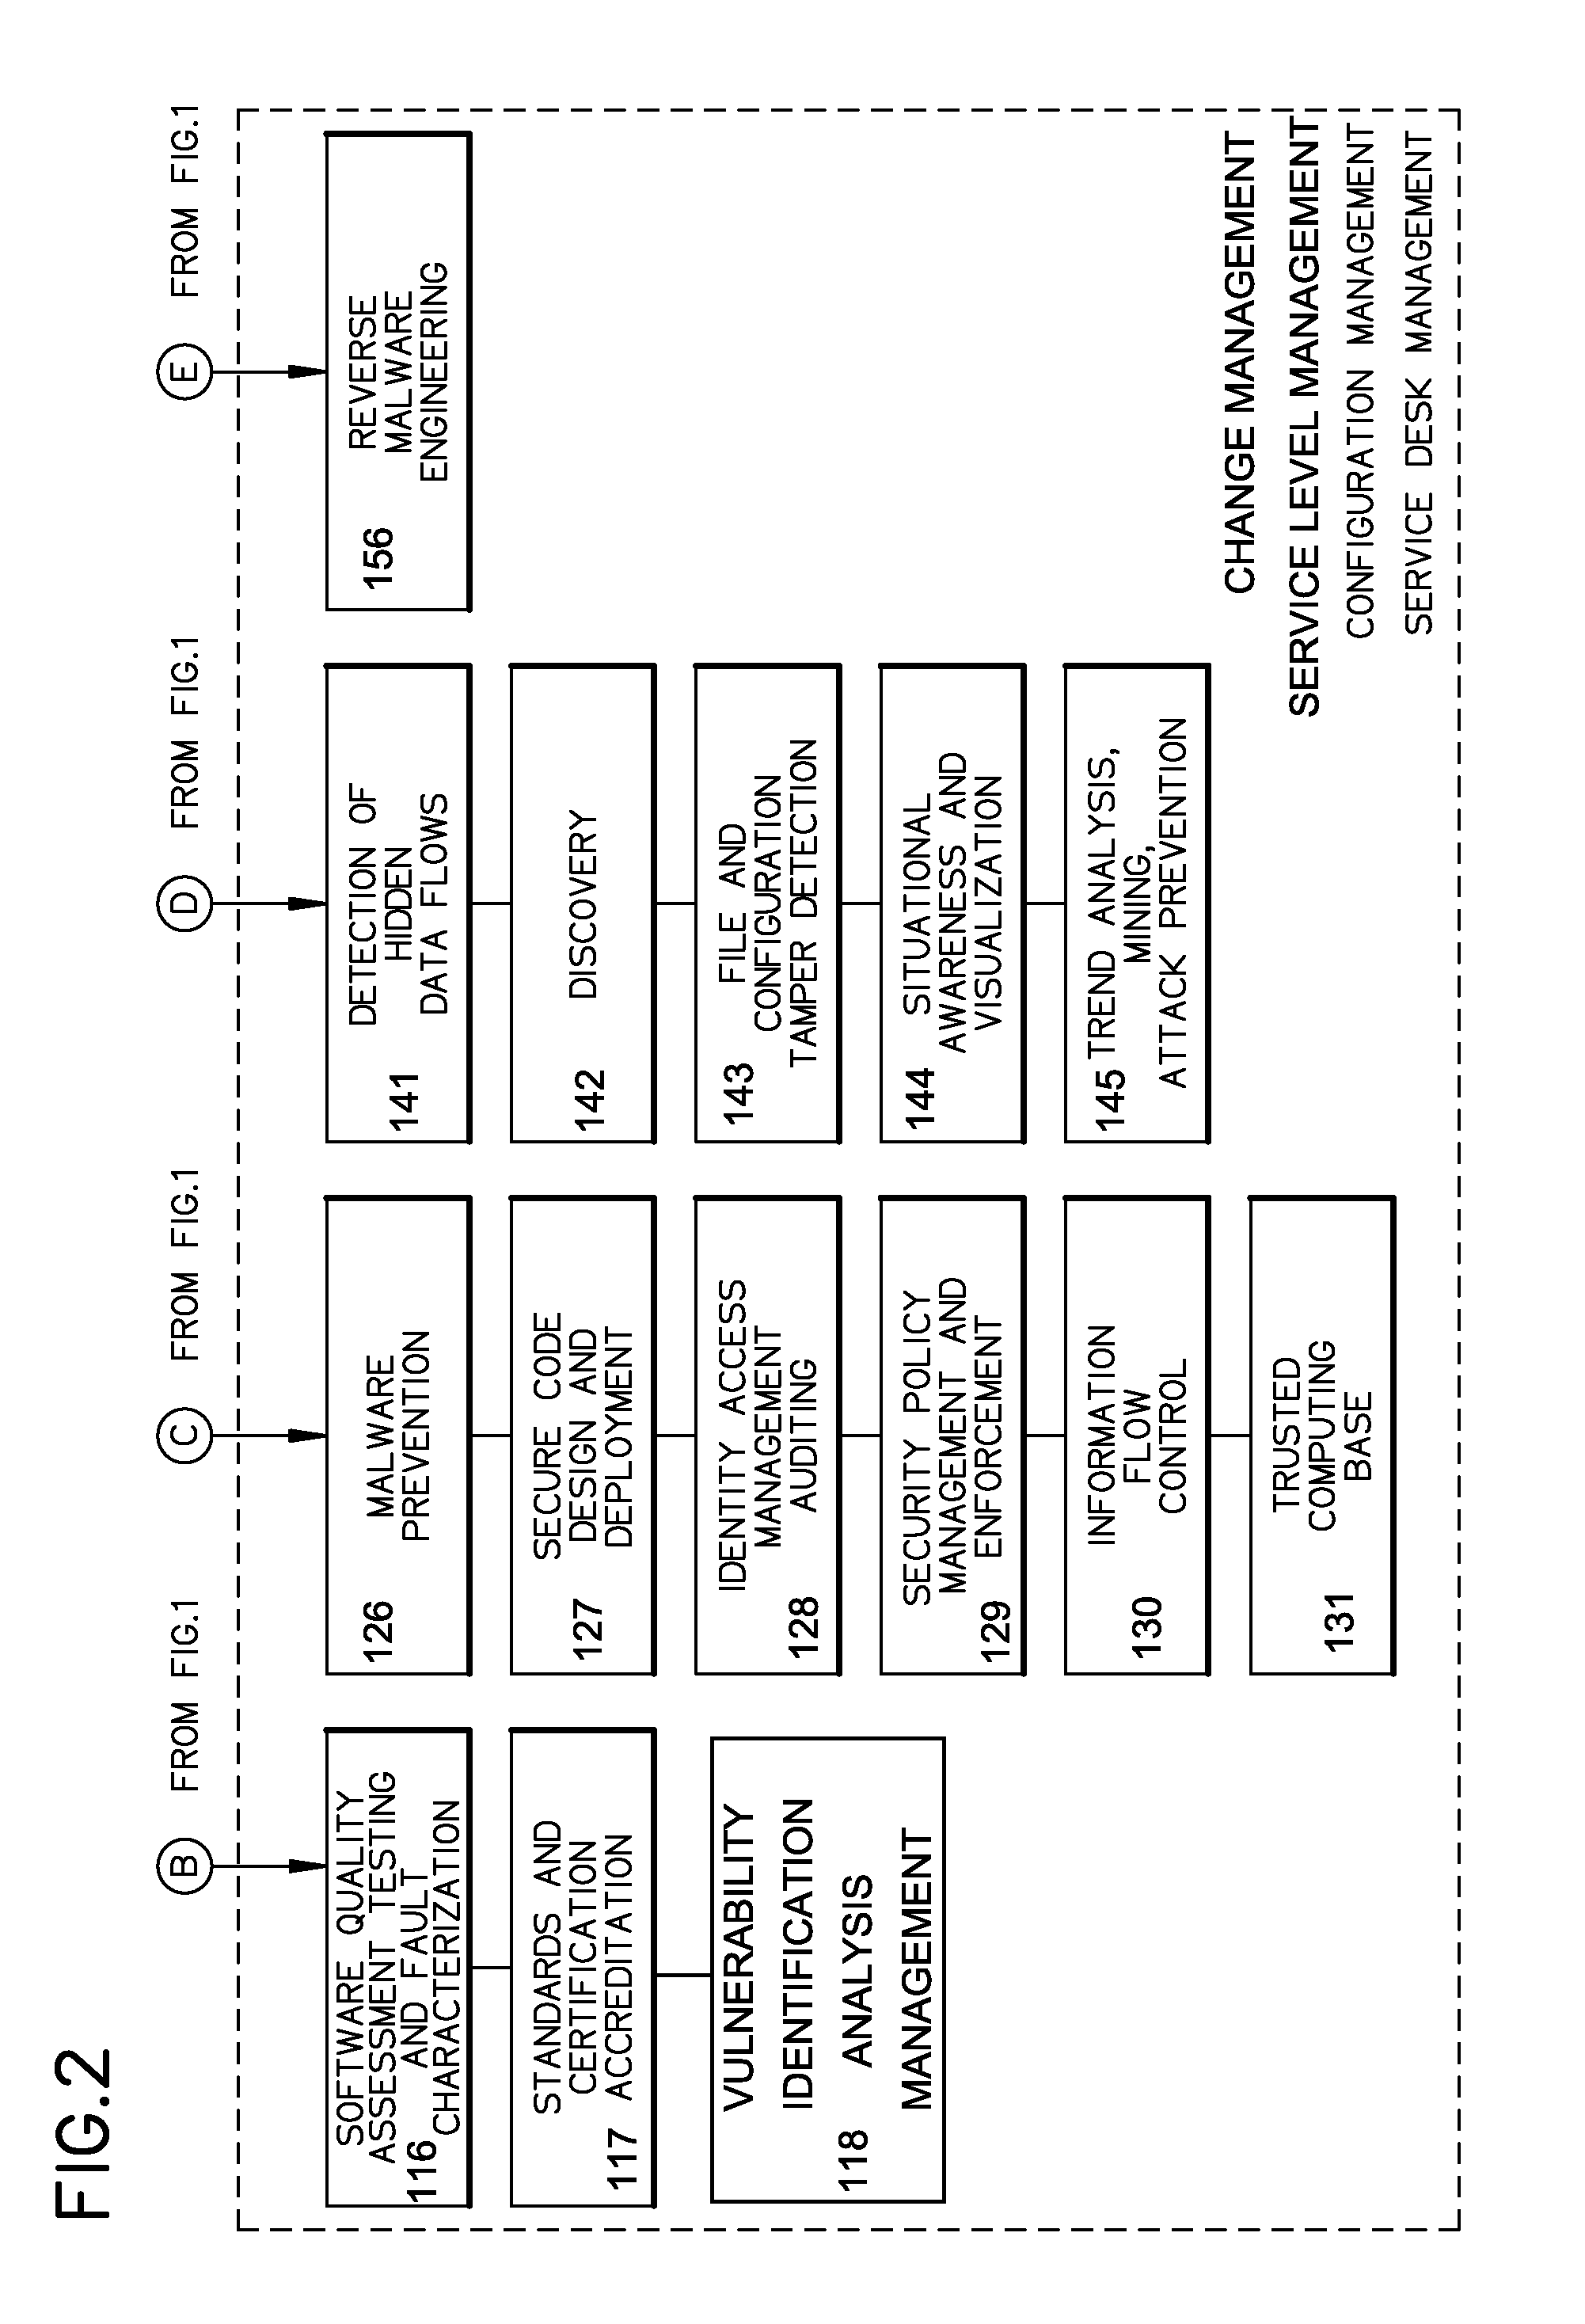 Method of providing cyber security as a service